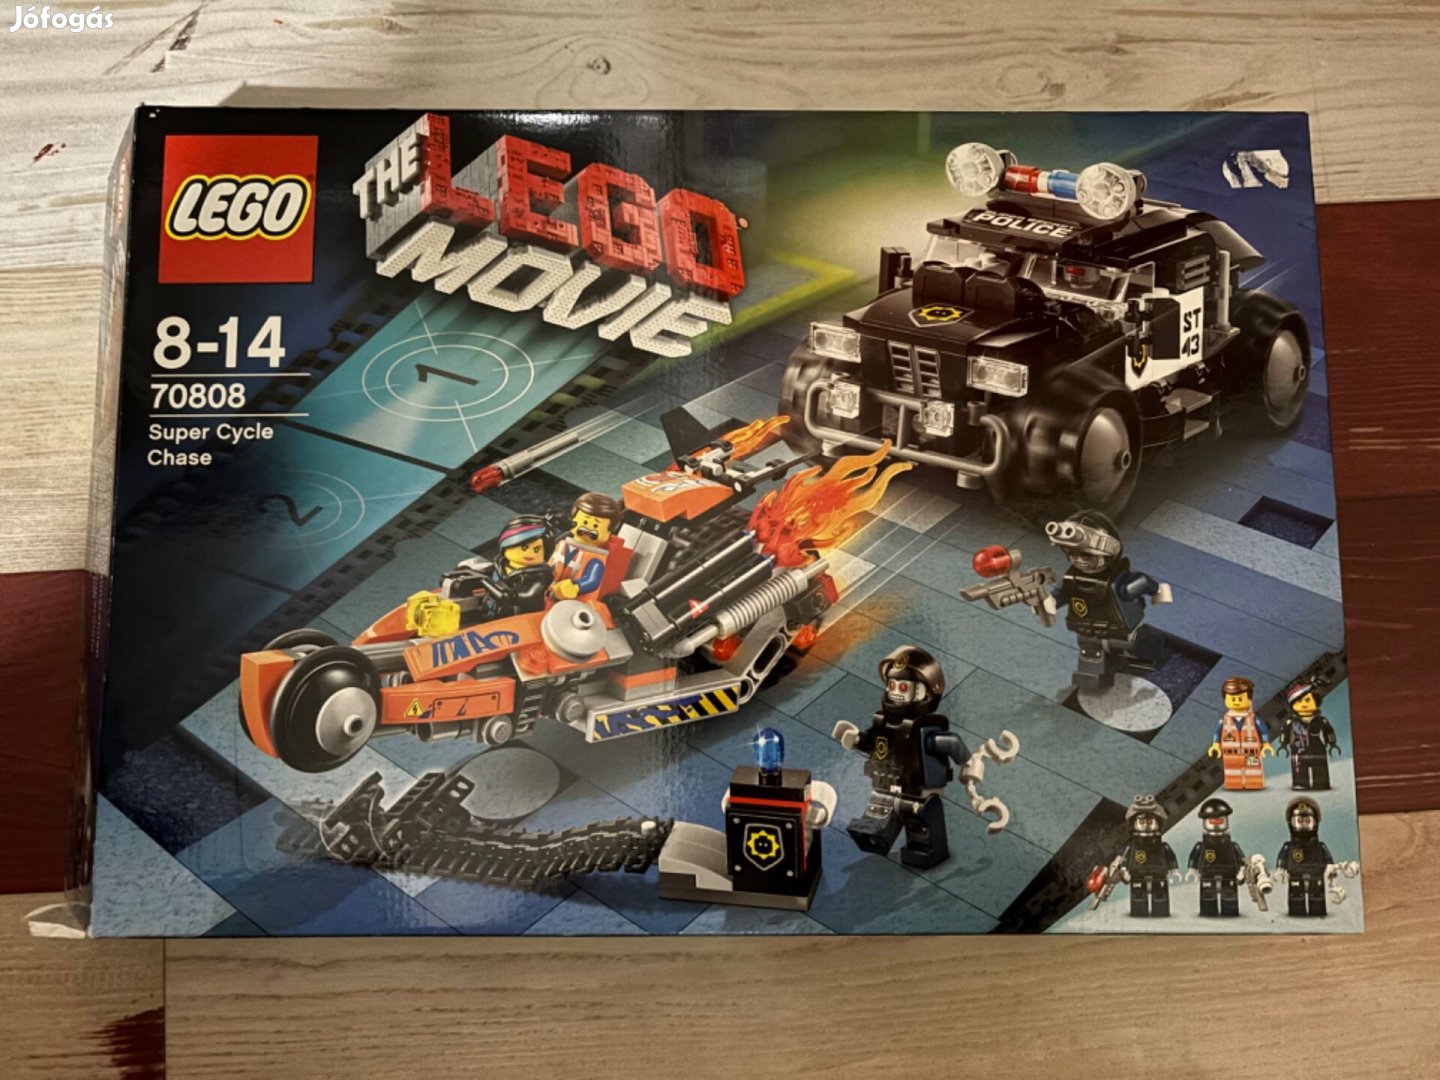 Lego 70808 The LEGO Movie Super Cycle Chase